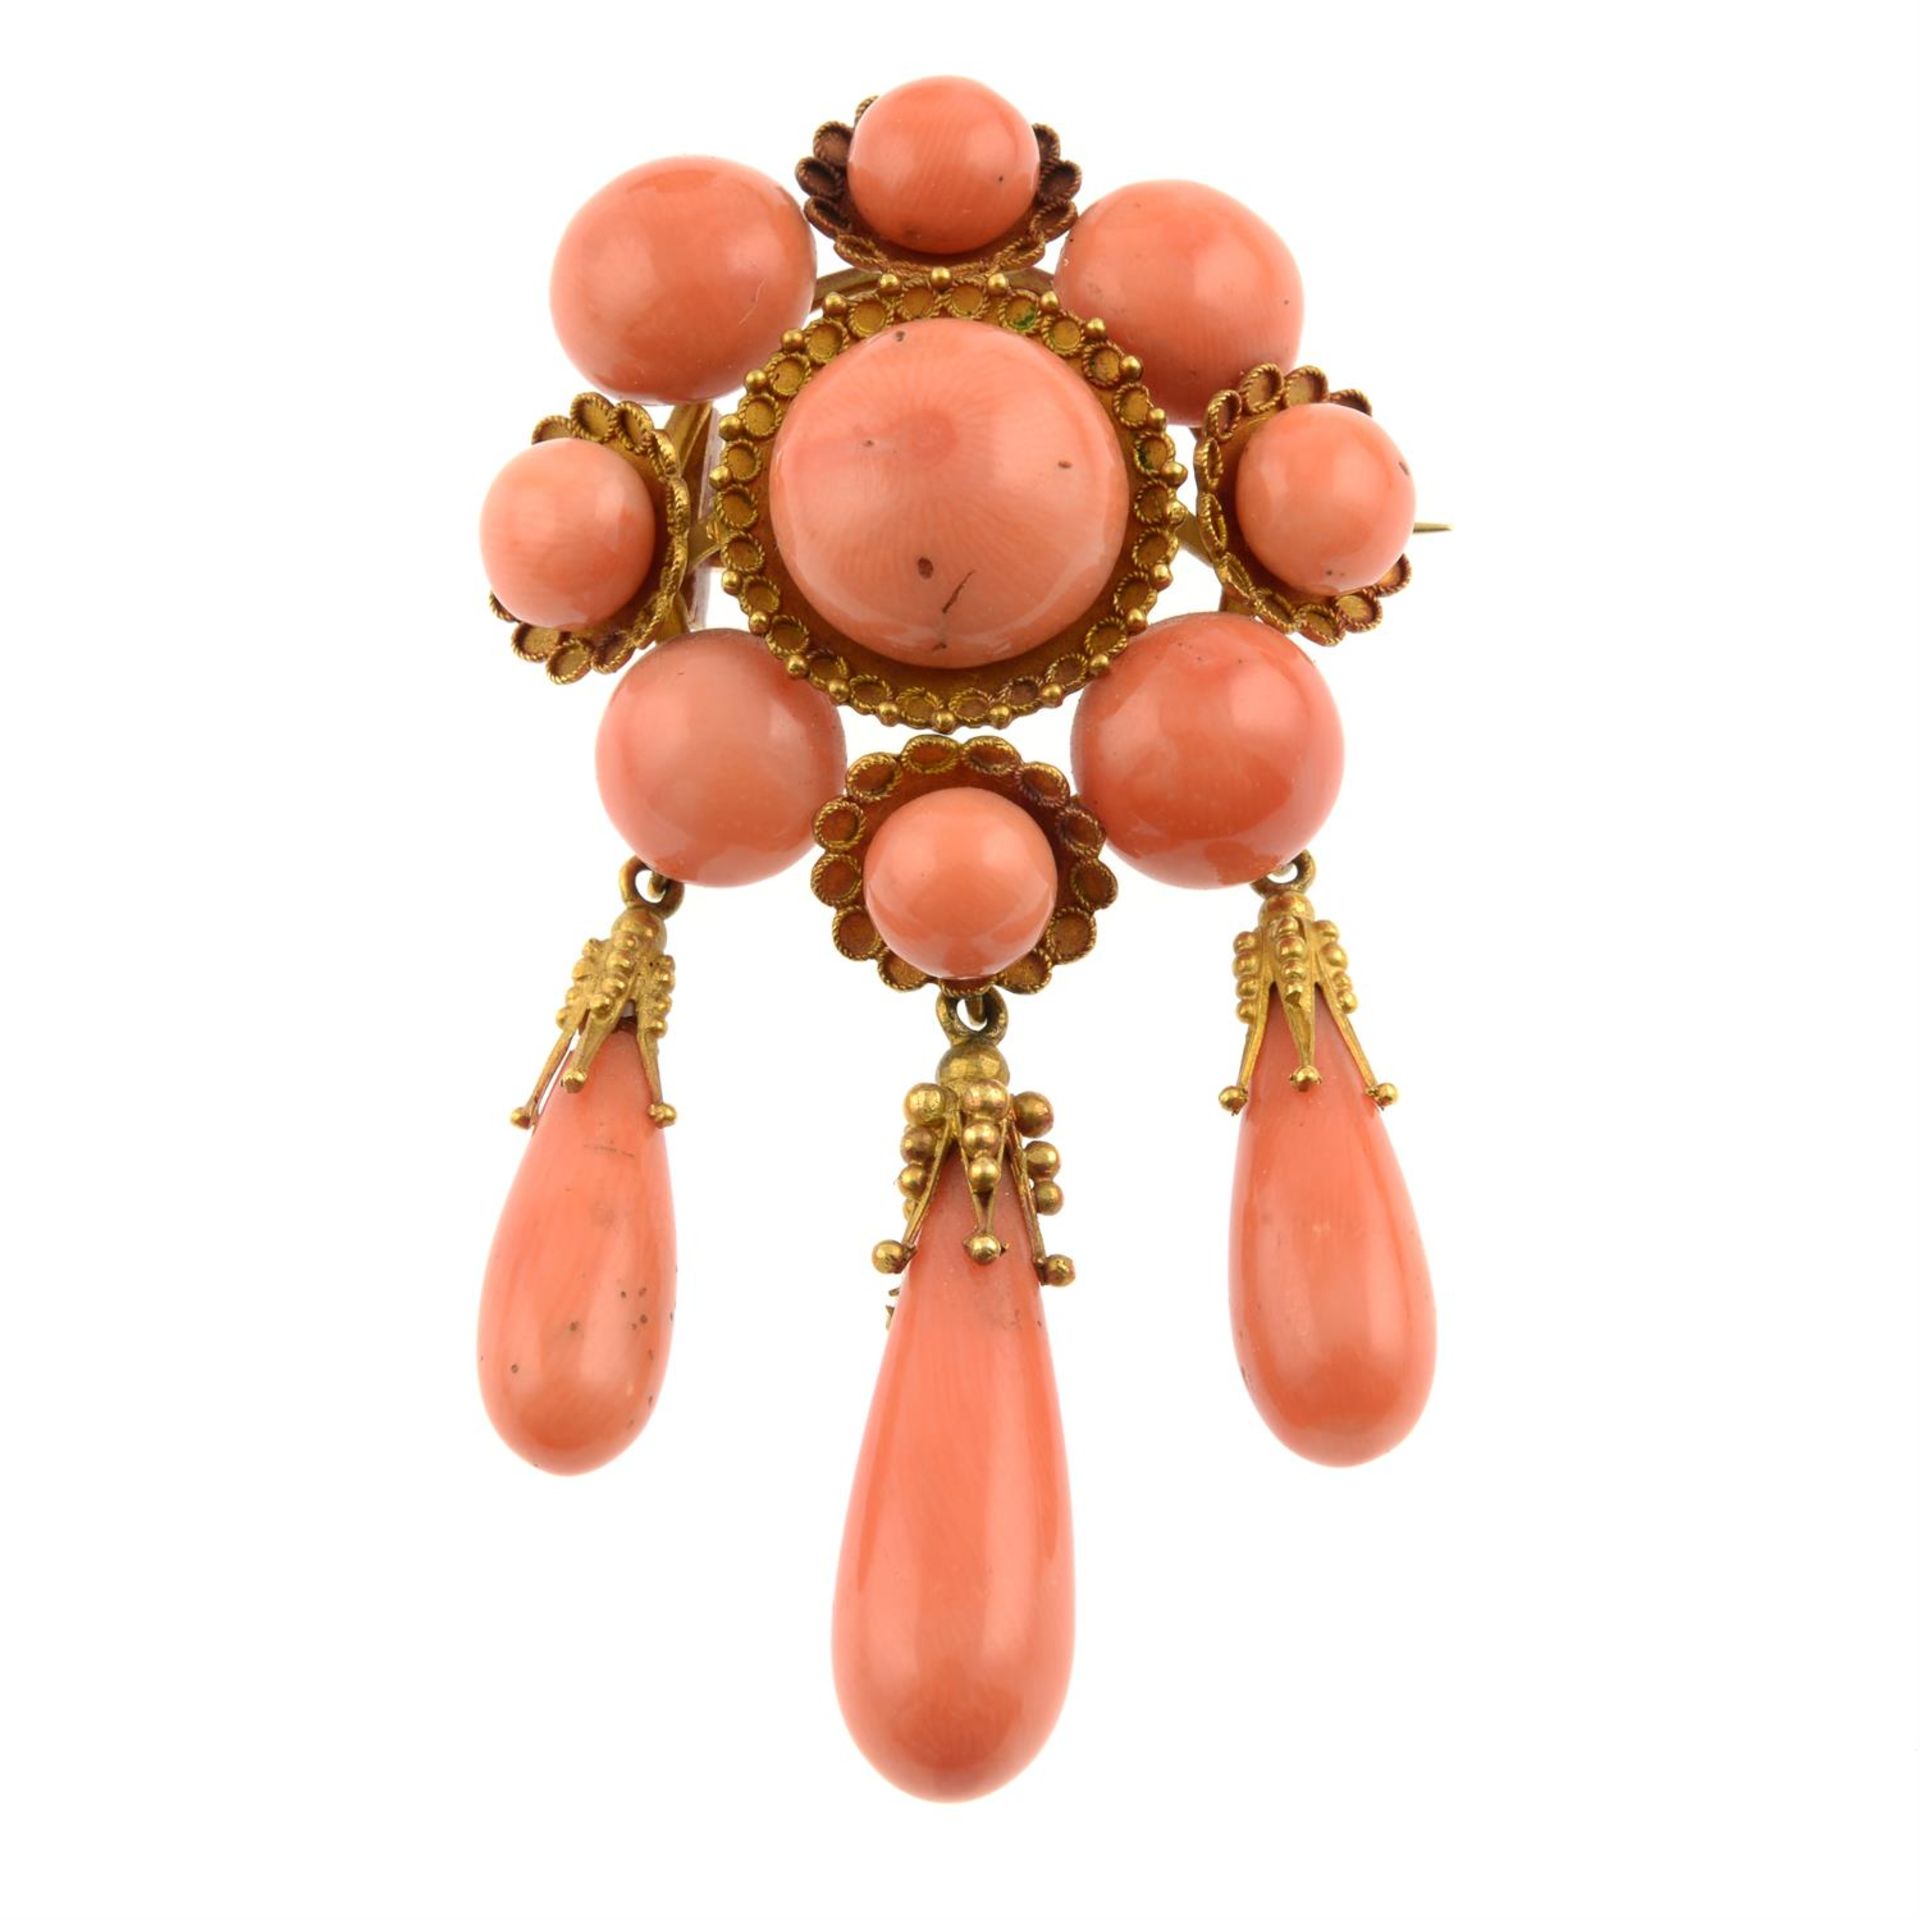 A mid to late 19th century gold coral brooch, with drop fringe, by Luigi Casalta. - Image 2 of 7